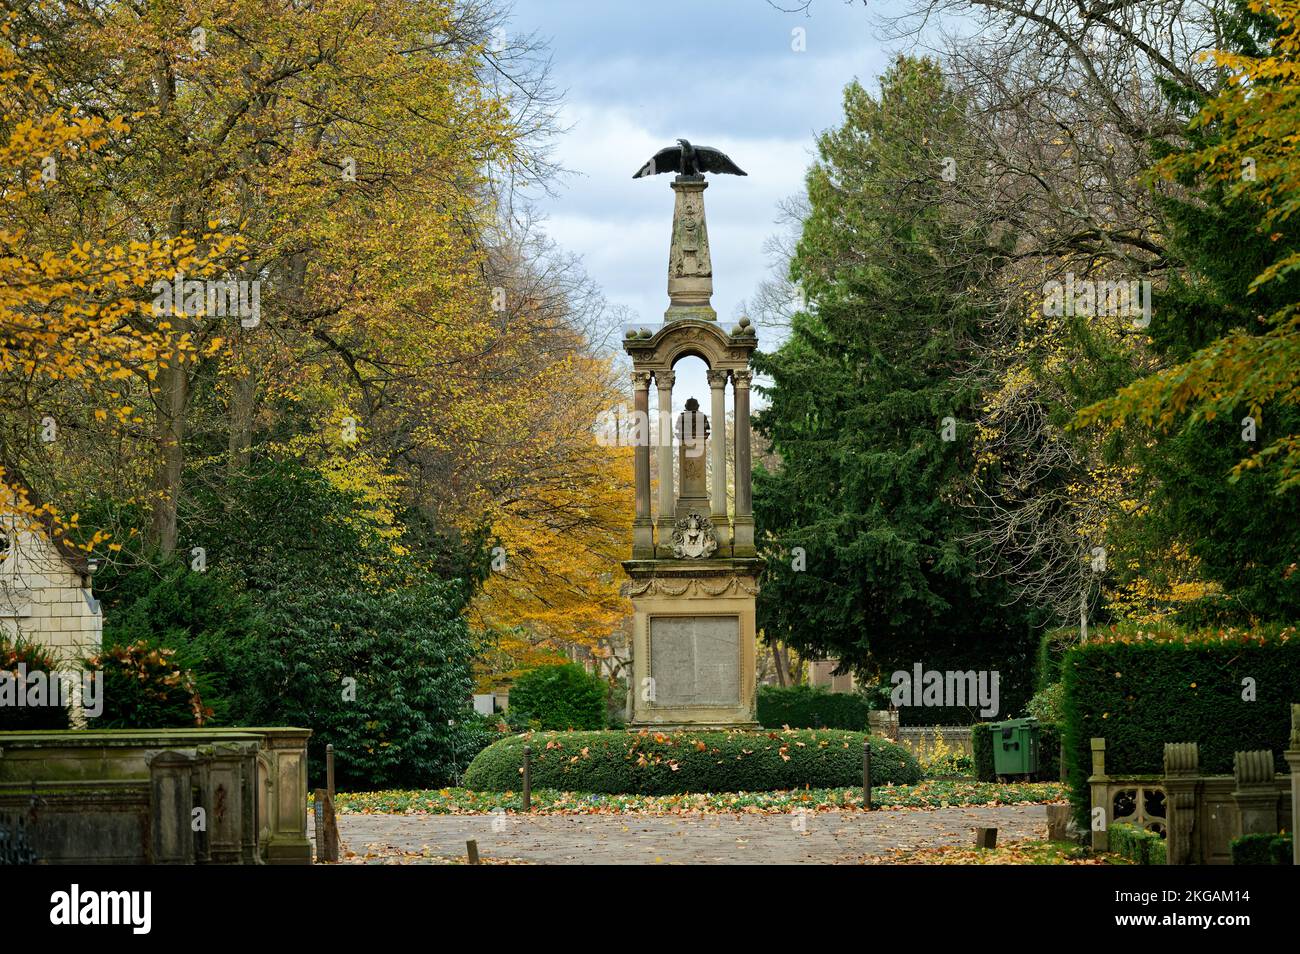 the eagle pillar on the million path of the historic cologne cemetery melaten in autumn Stock Photo